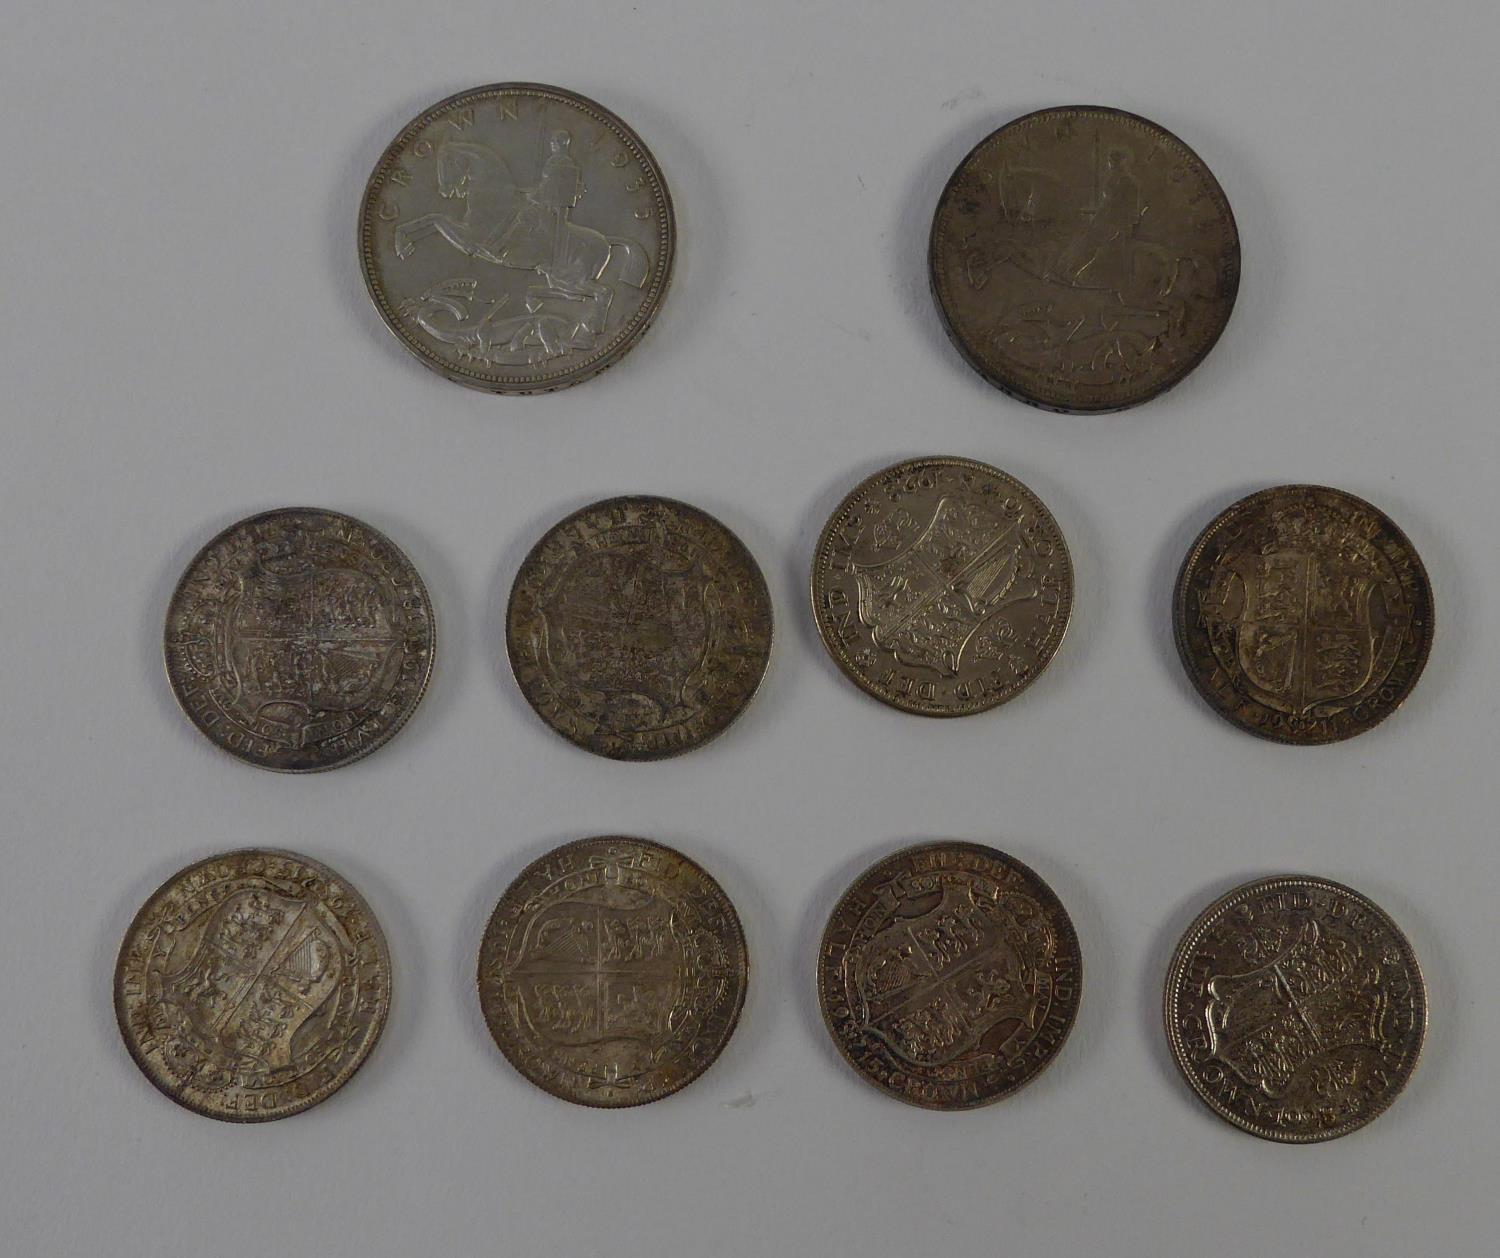 TWO GEORGE V SILVER CROWN COINS, 1935 (VF) and EIGHT VARIOUS GEORGE V SILVER HALF CROWNS (mainly